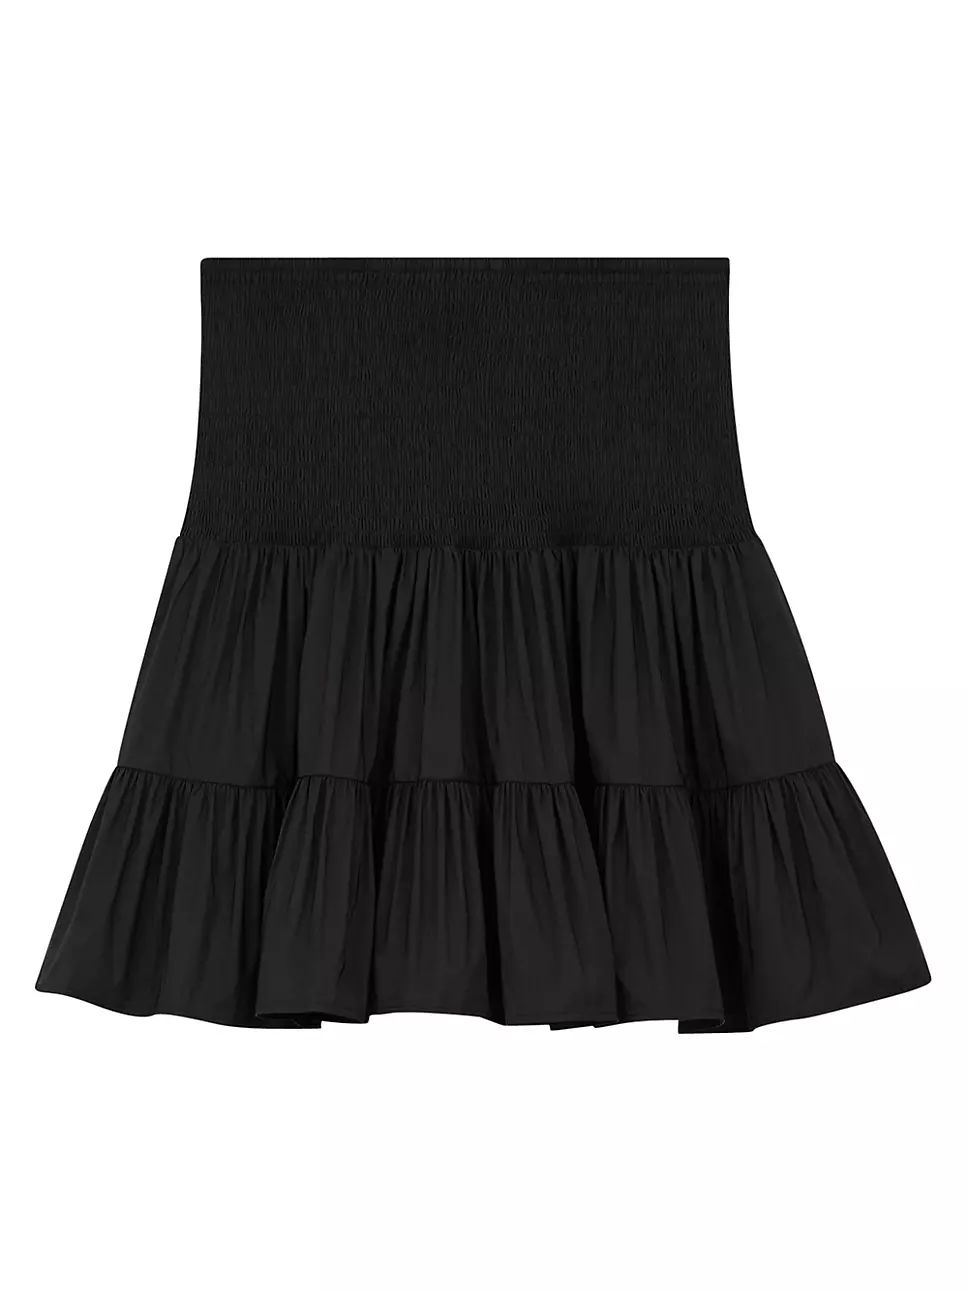 Short Skirt With Smocking And Ruffles | Saks Fifth Avenue